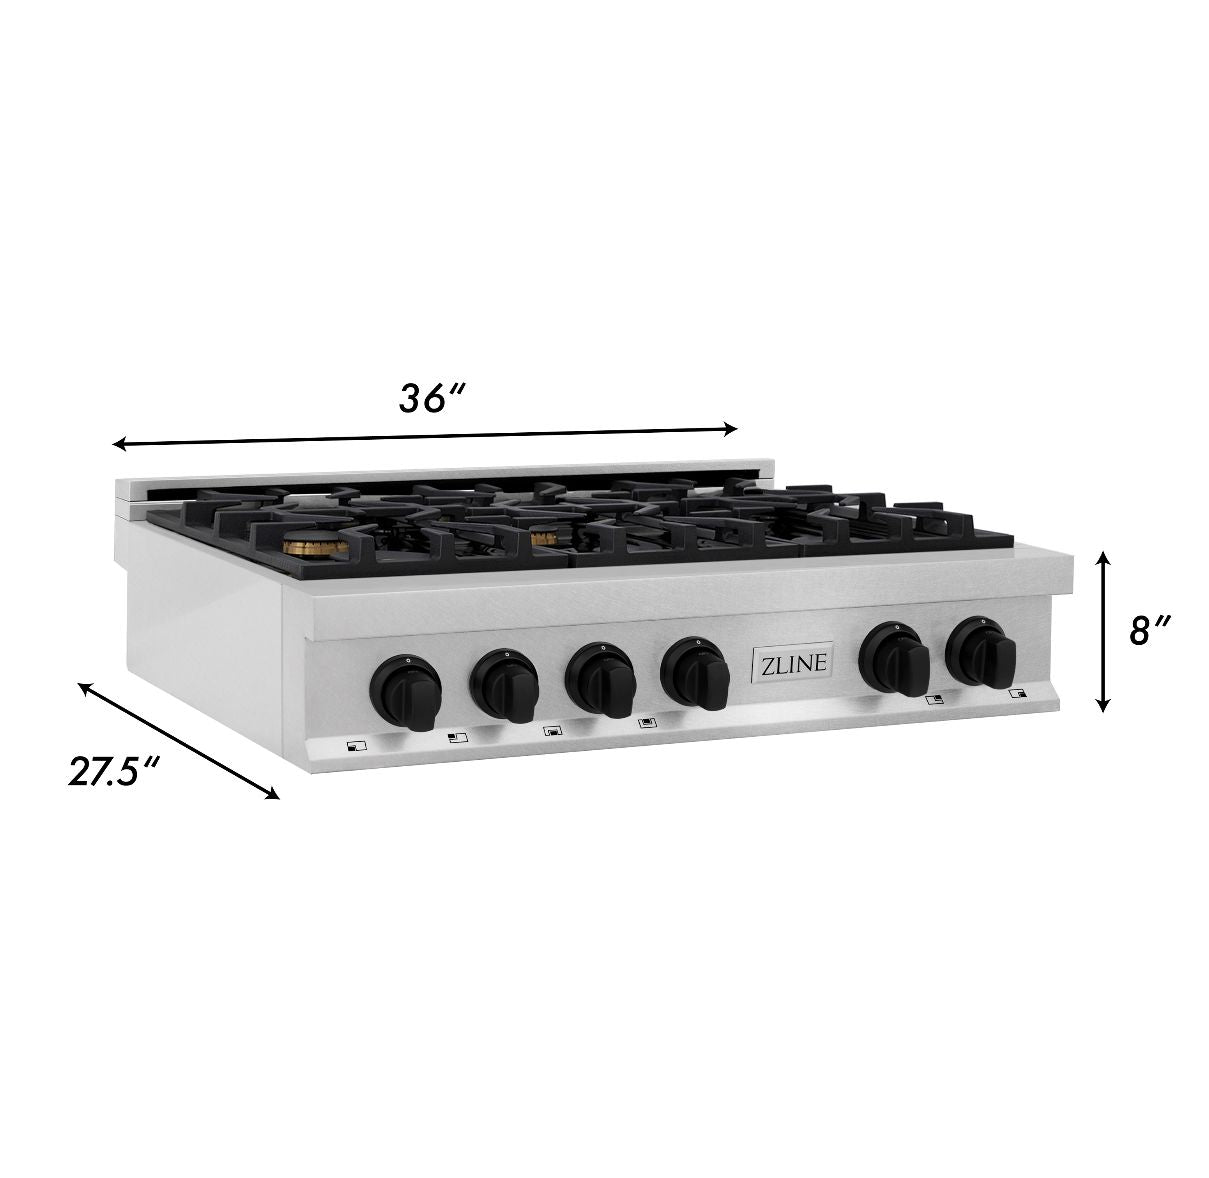 ZLINE Autograph Edition 36 in. Porcelain Rangetop with 6 Gas Burners in DuraSnow Stainless Steel with Matte Black Accents (RTSZ-36-MB) dimensional diagram with measurements.